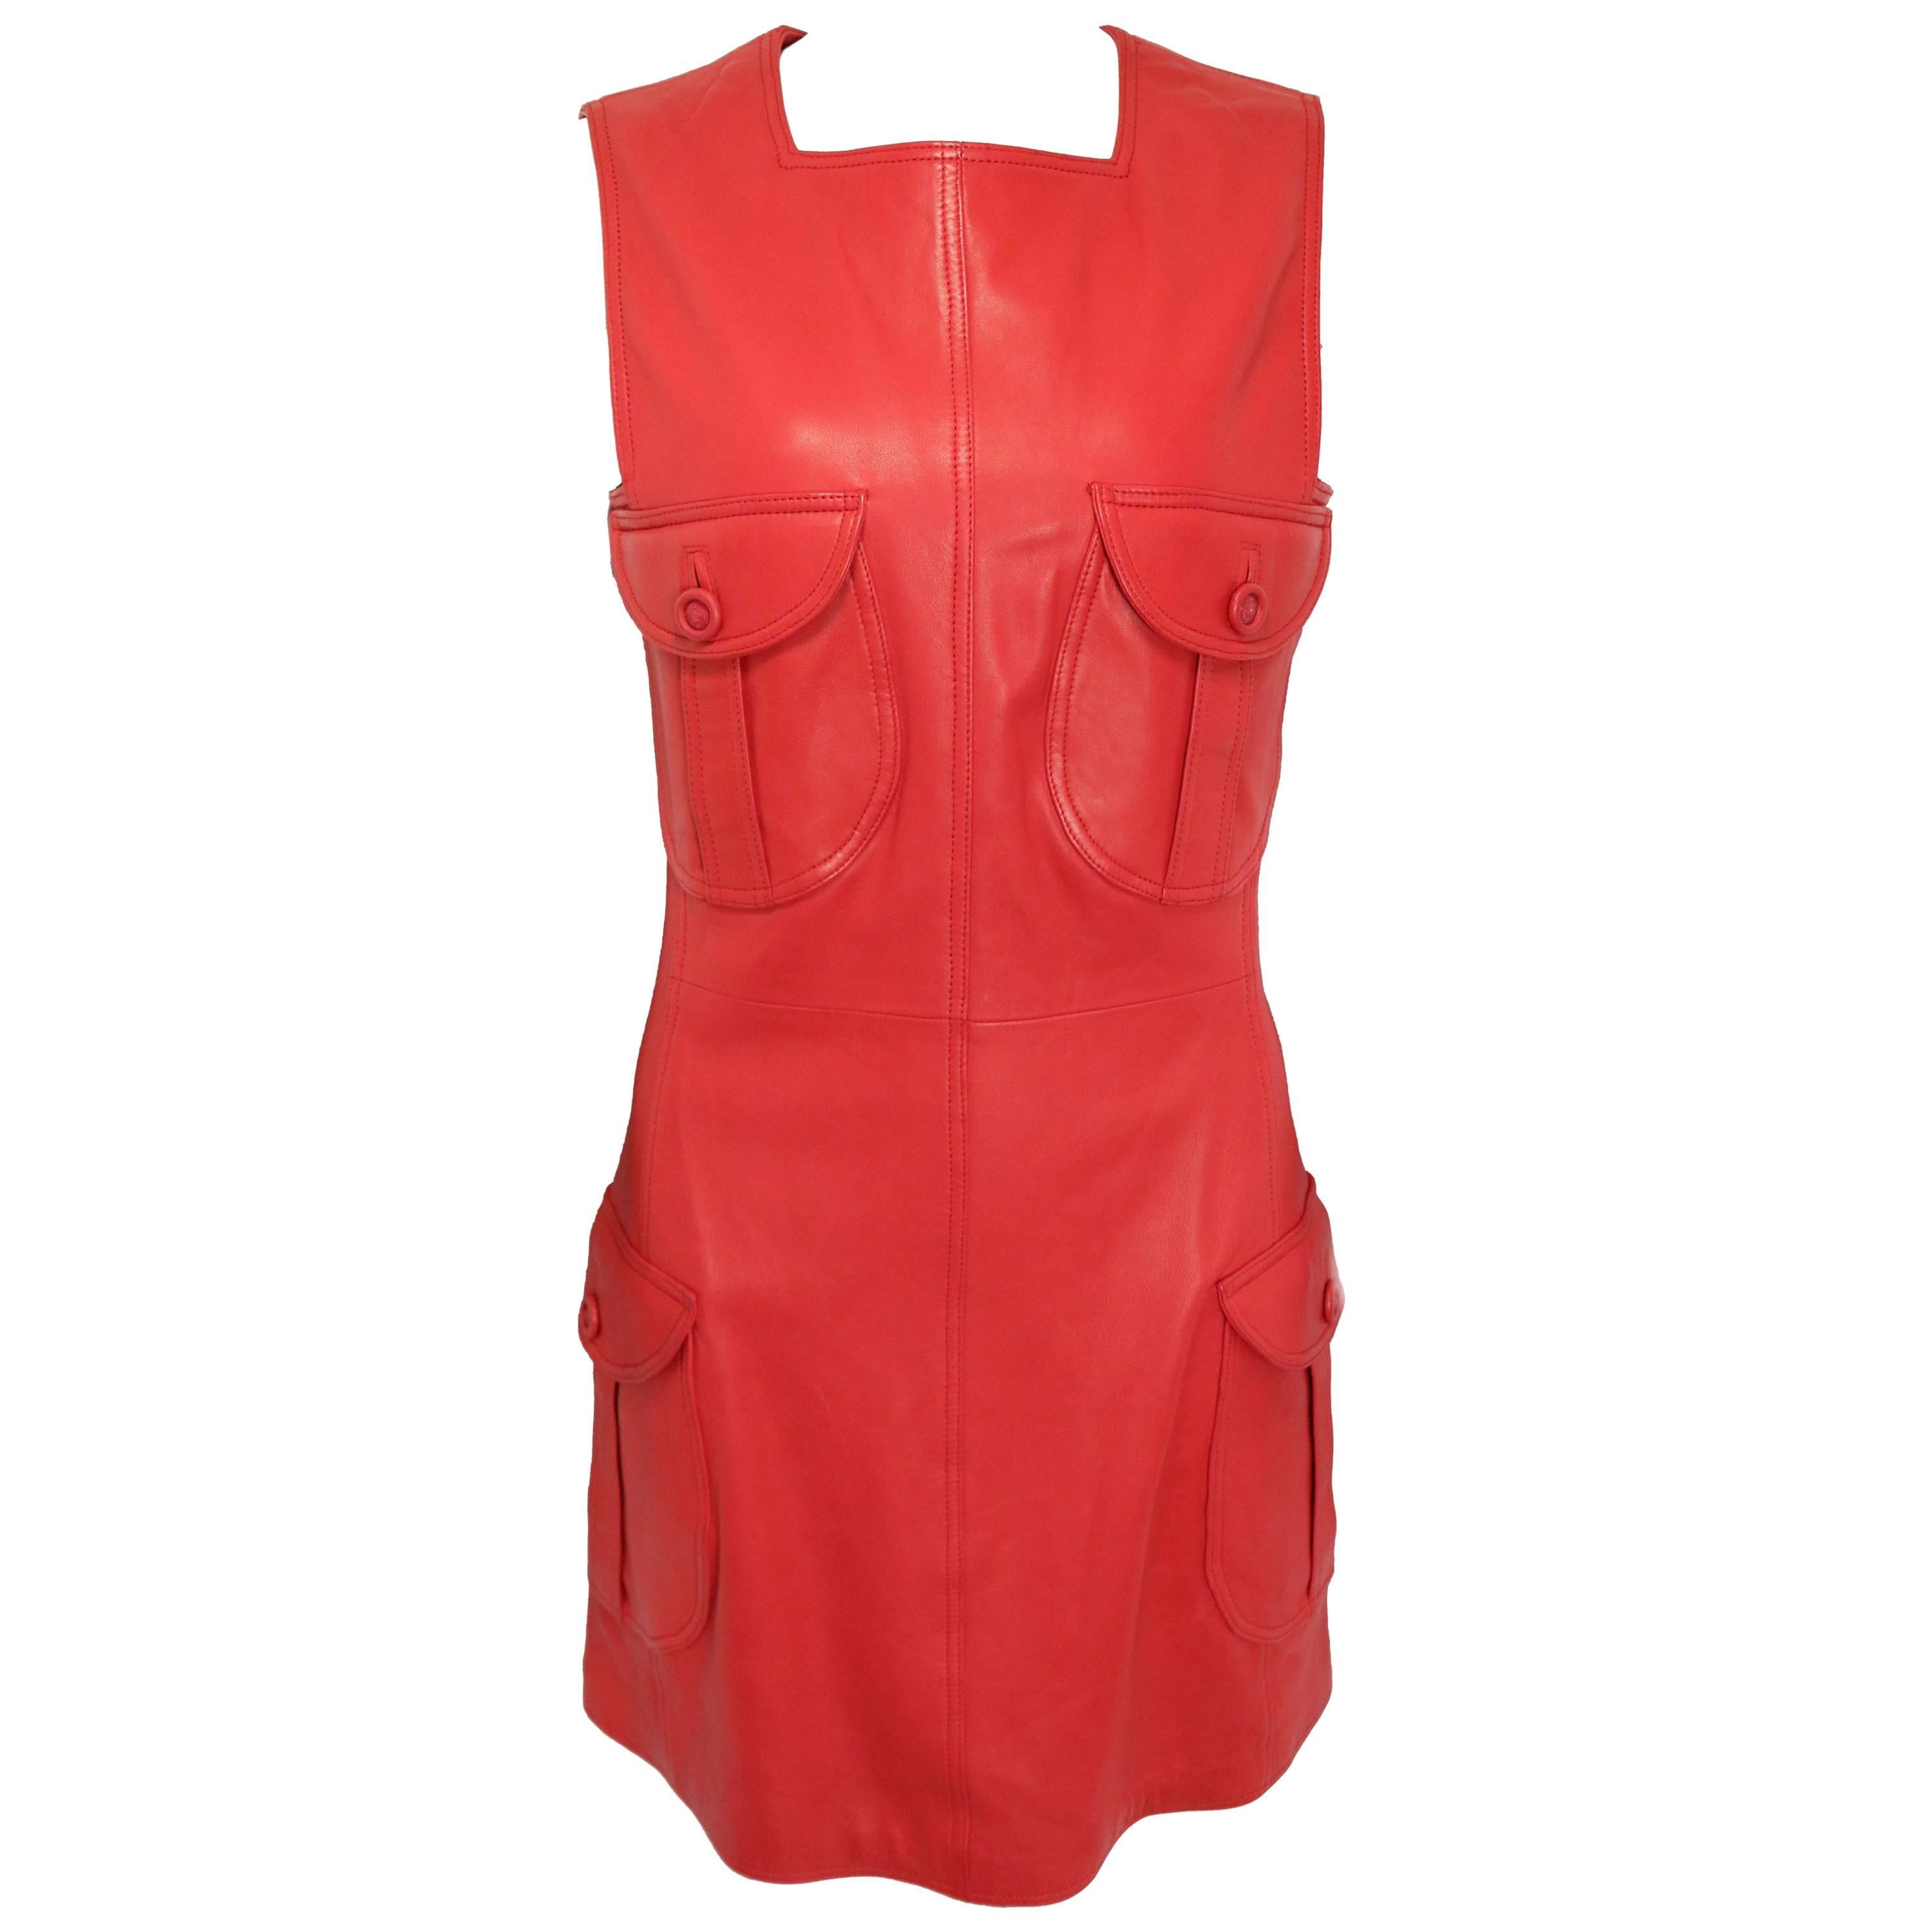 Iconic 90s Gianni Versace Red Leather Dress 